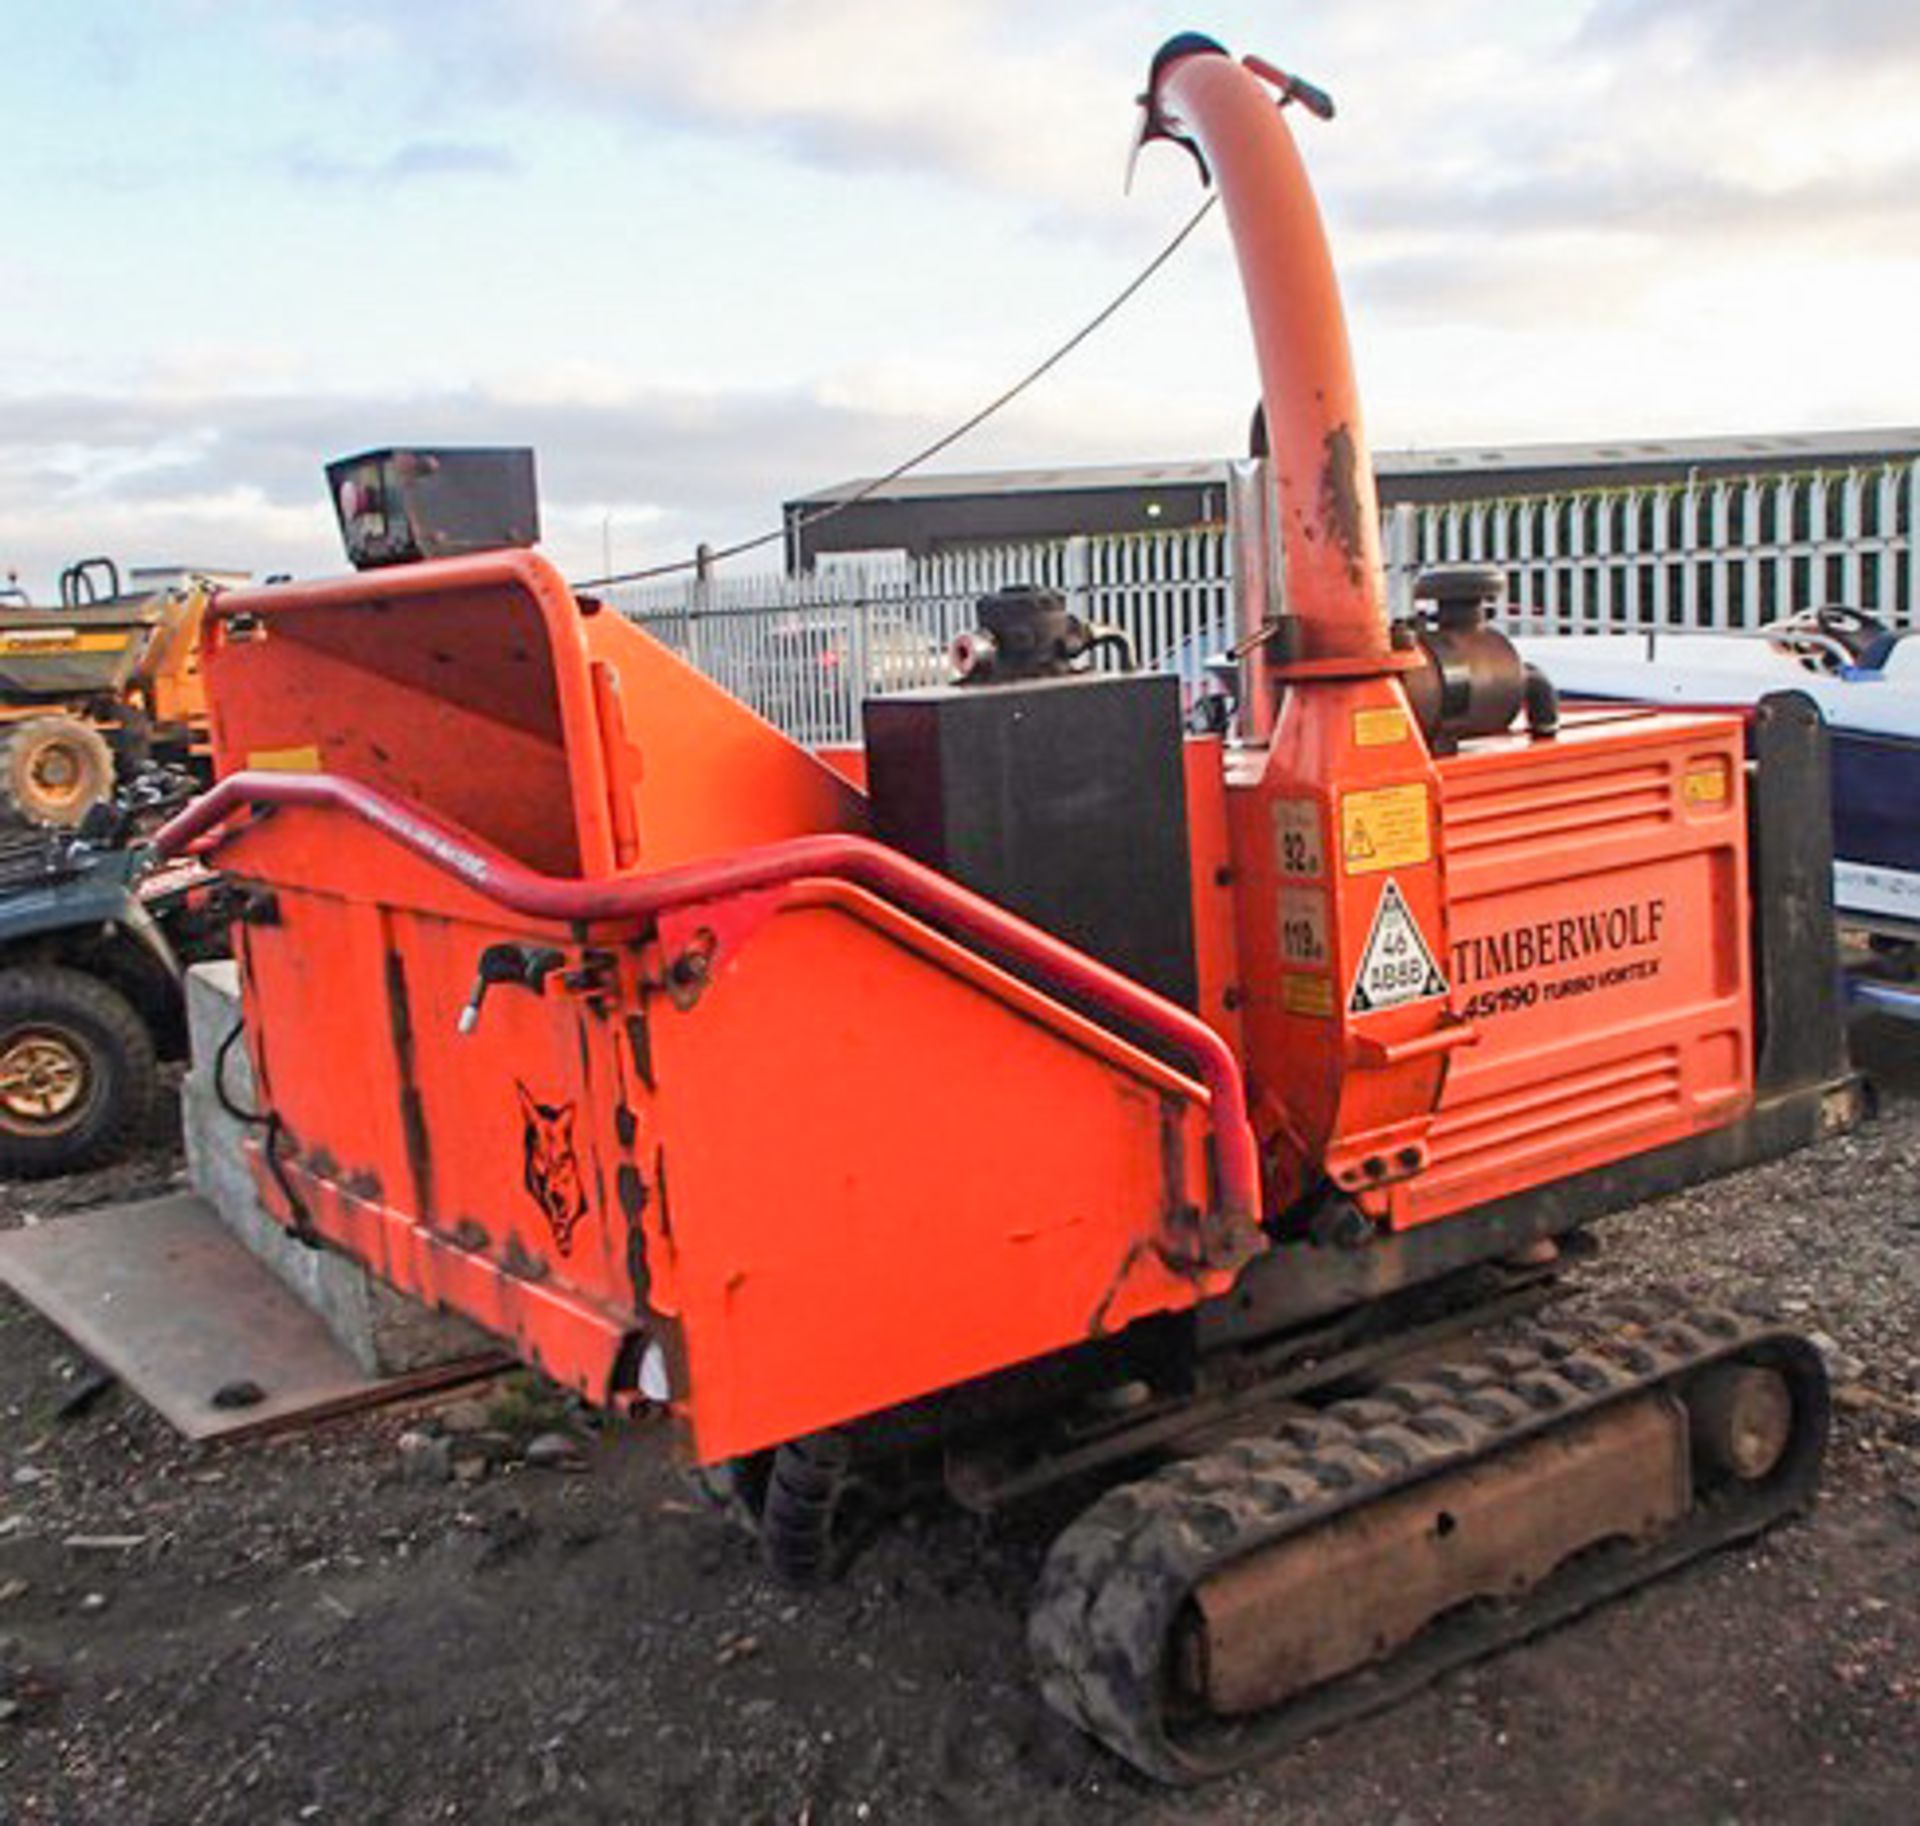 2010 TIMBERWOOLF WOOD CHIPPER, MODEL TW190 TFTR,S/N 21056015, HRS 1325 SHOWING ON CLOCK, ASSET NO - Image 4 of 10